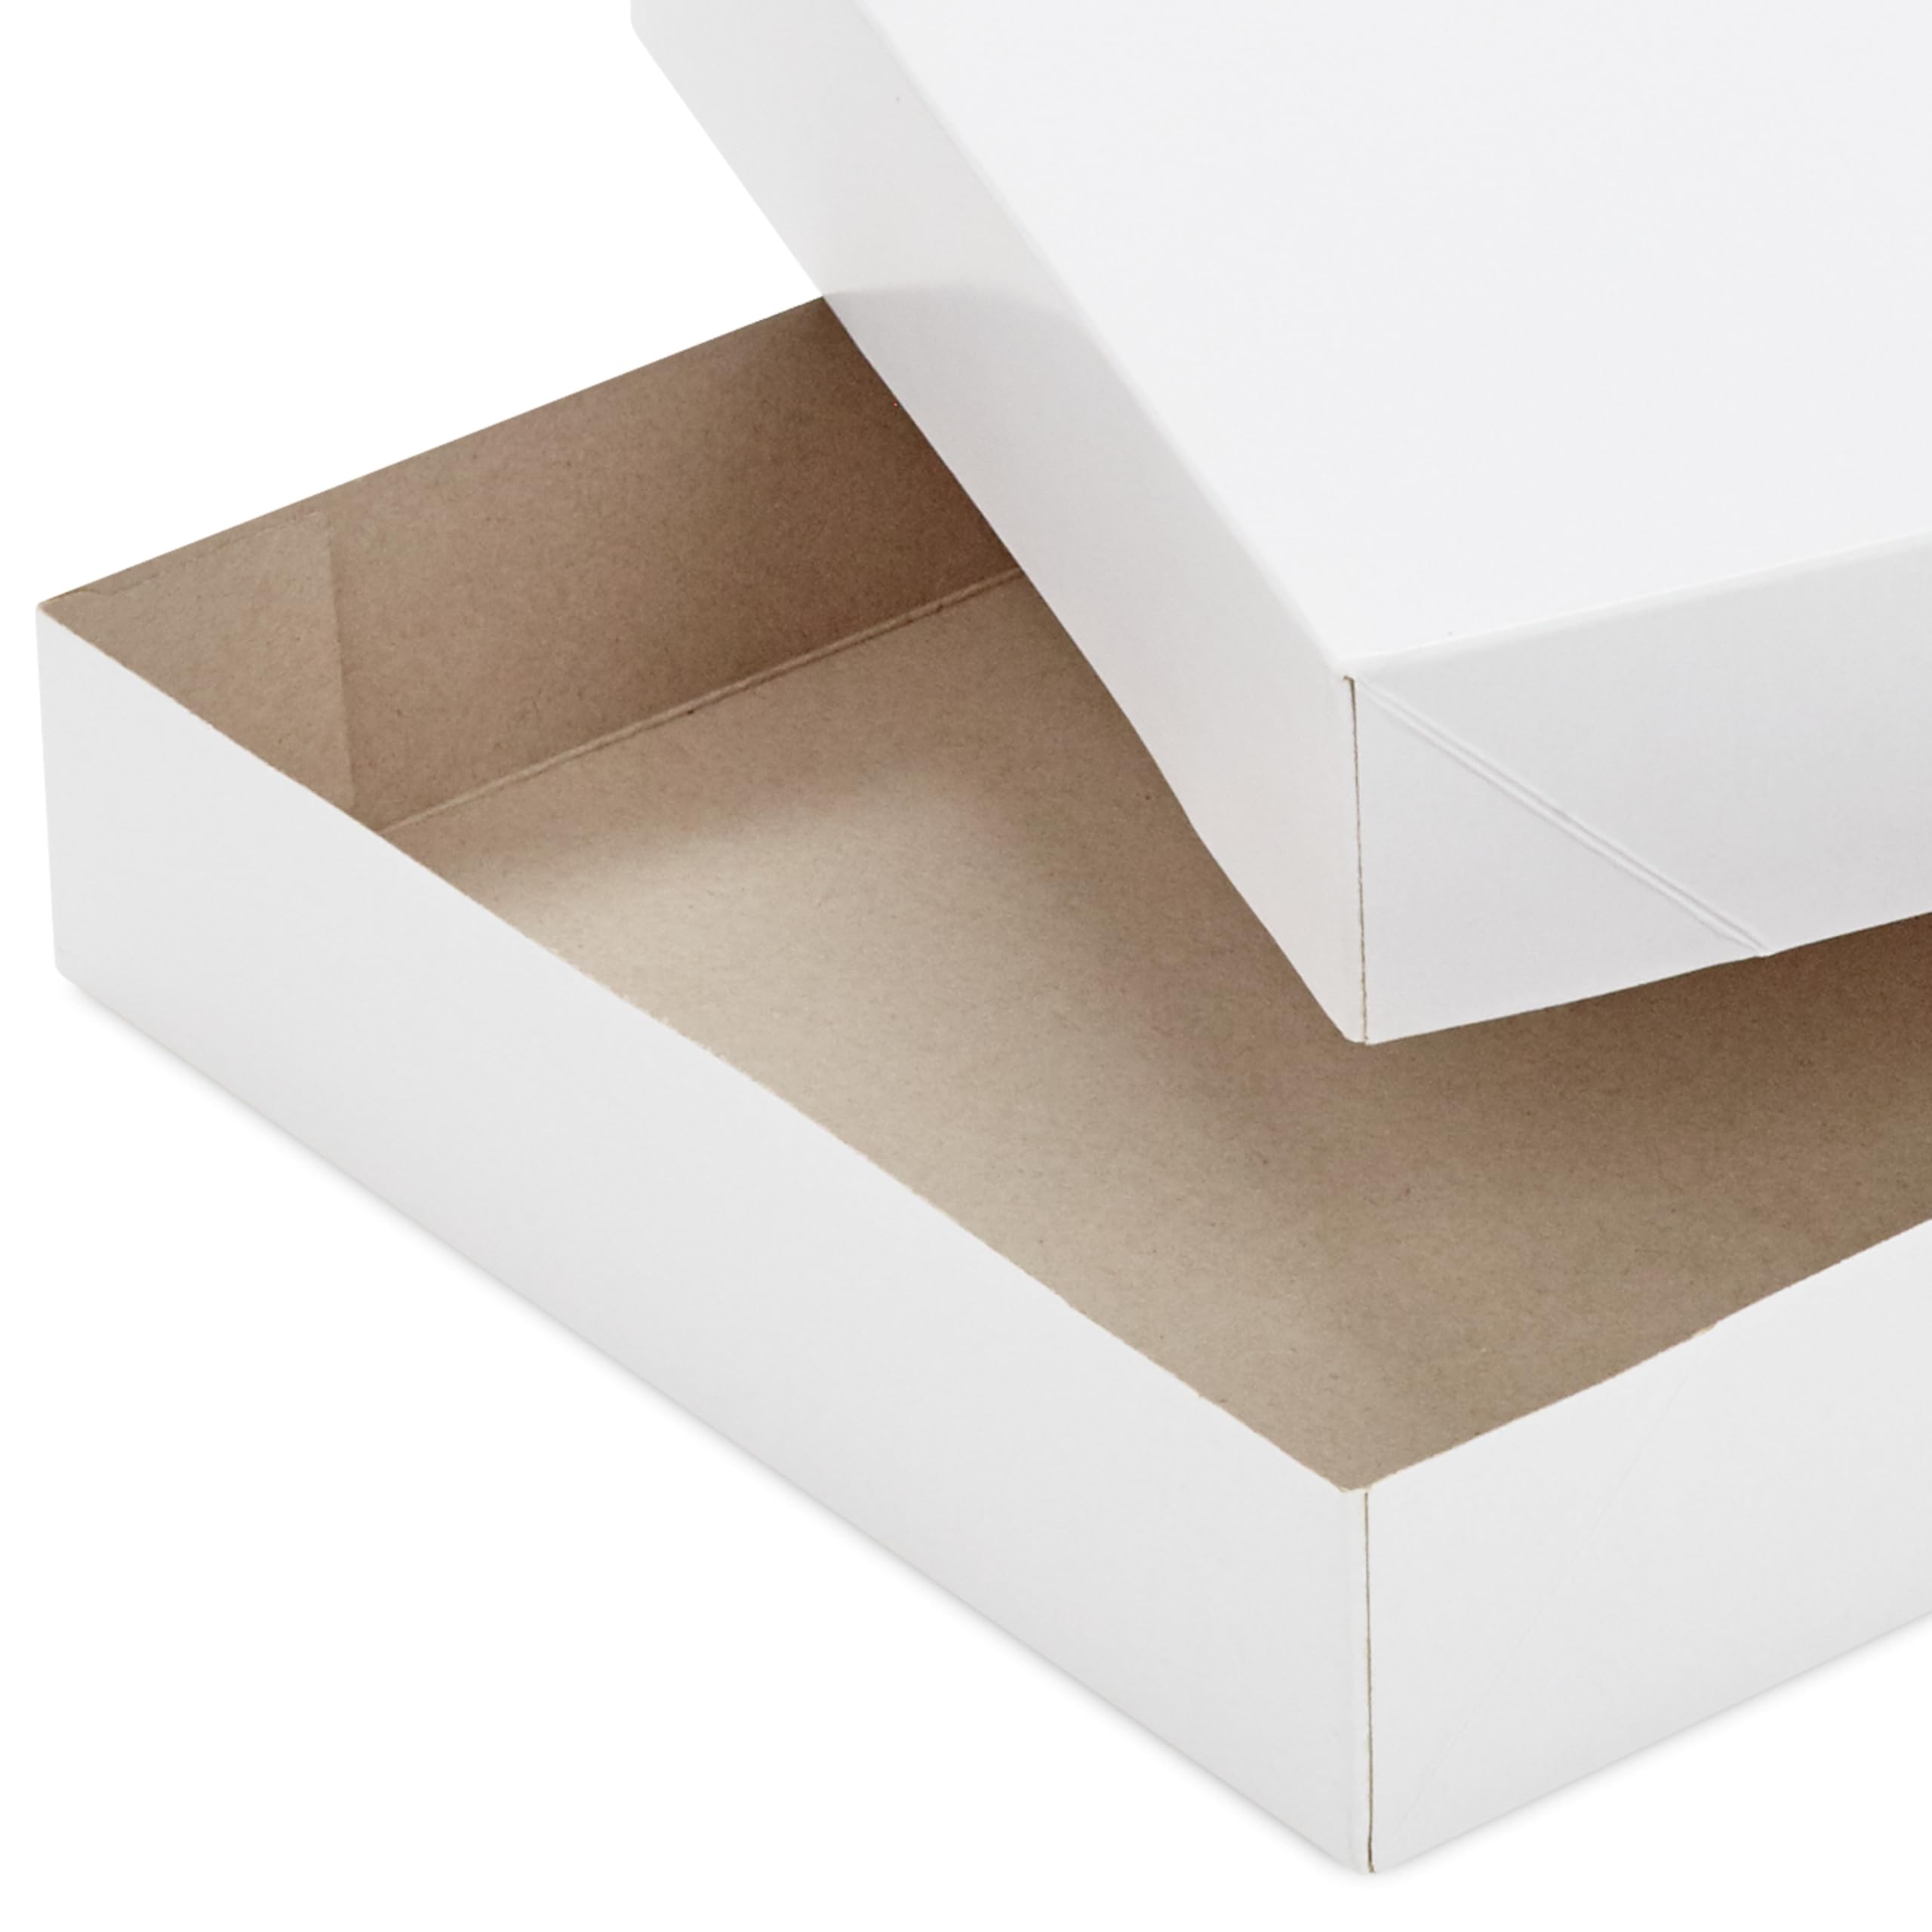 Hallmark White Gift Boxes, Assorted Sizes (12 Boxes with Lids: 4 Small 11